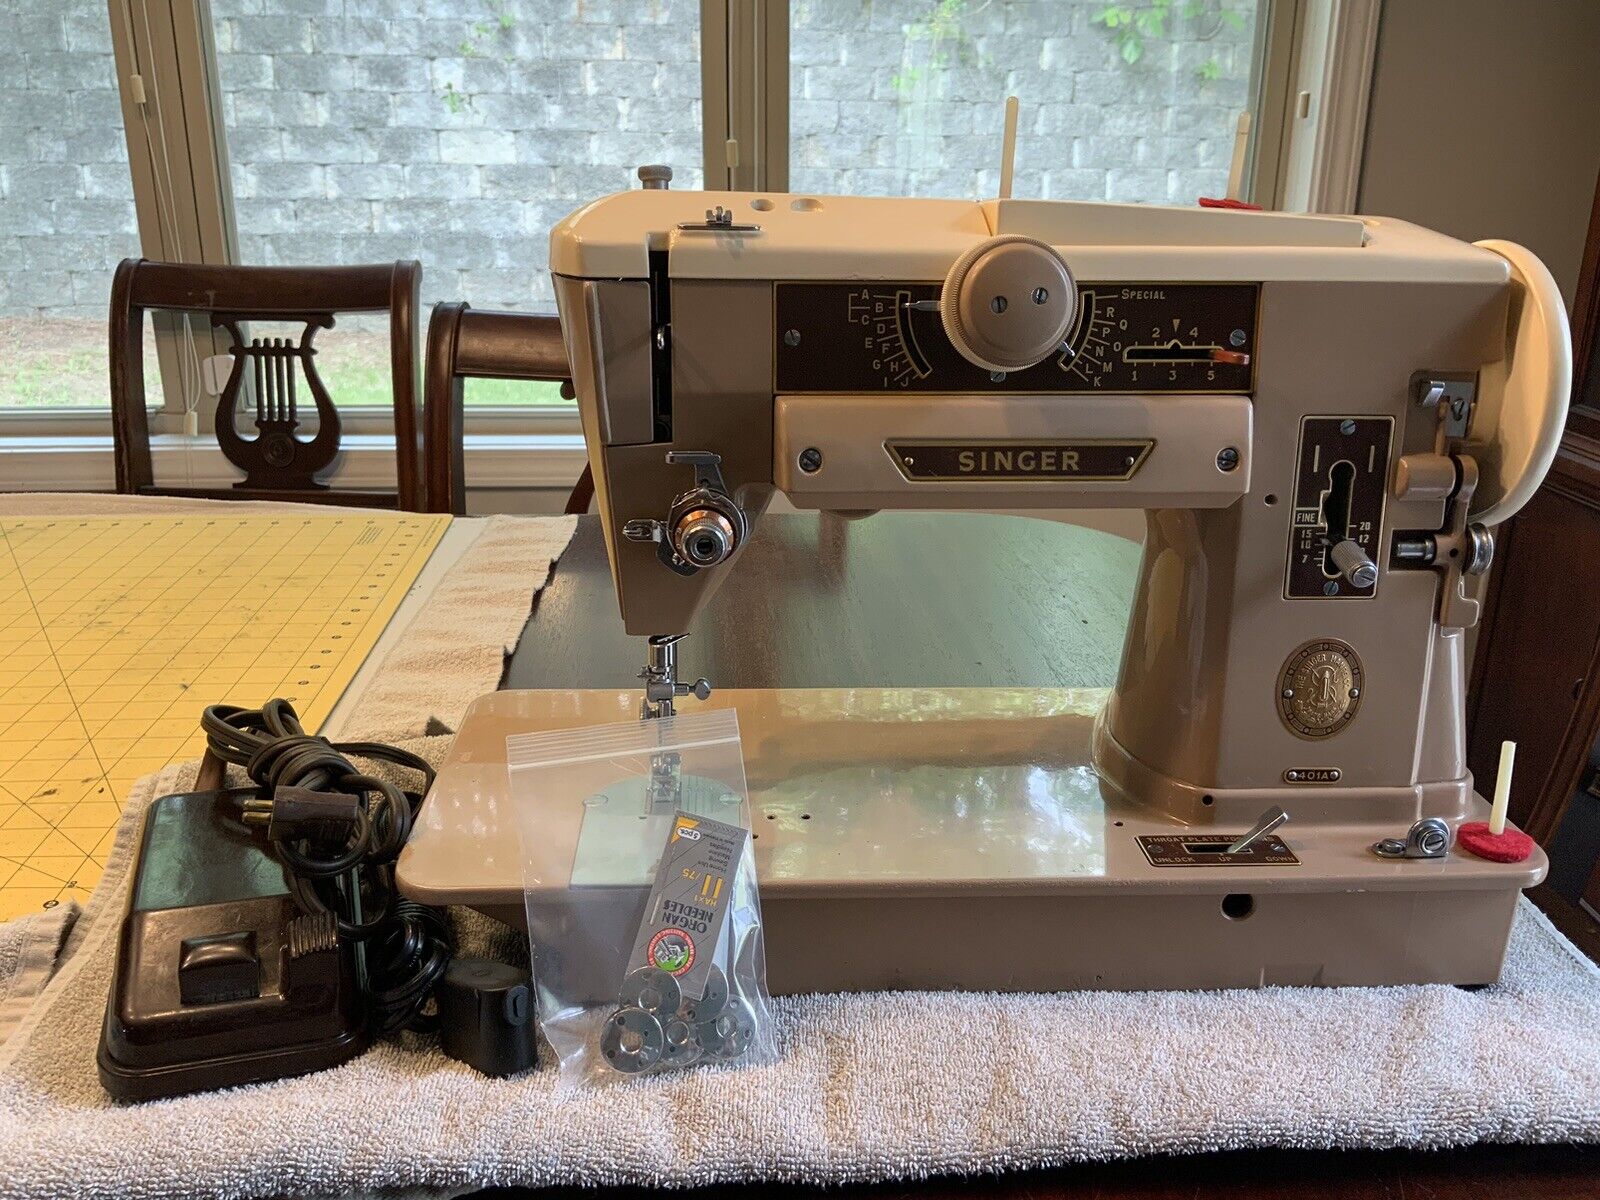 Singer 401a sewing machine cleaned and serviced Good cond SN NA817587